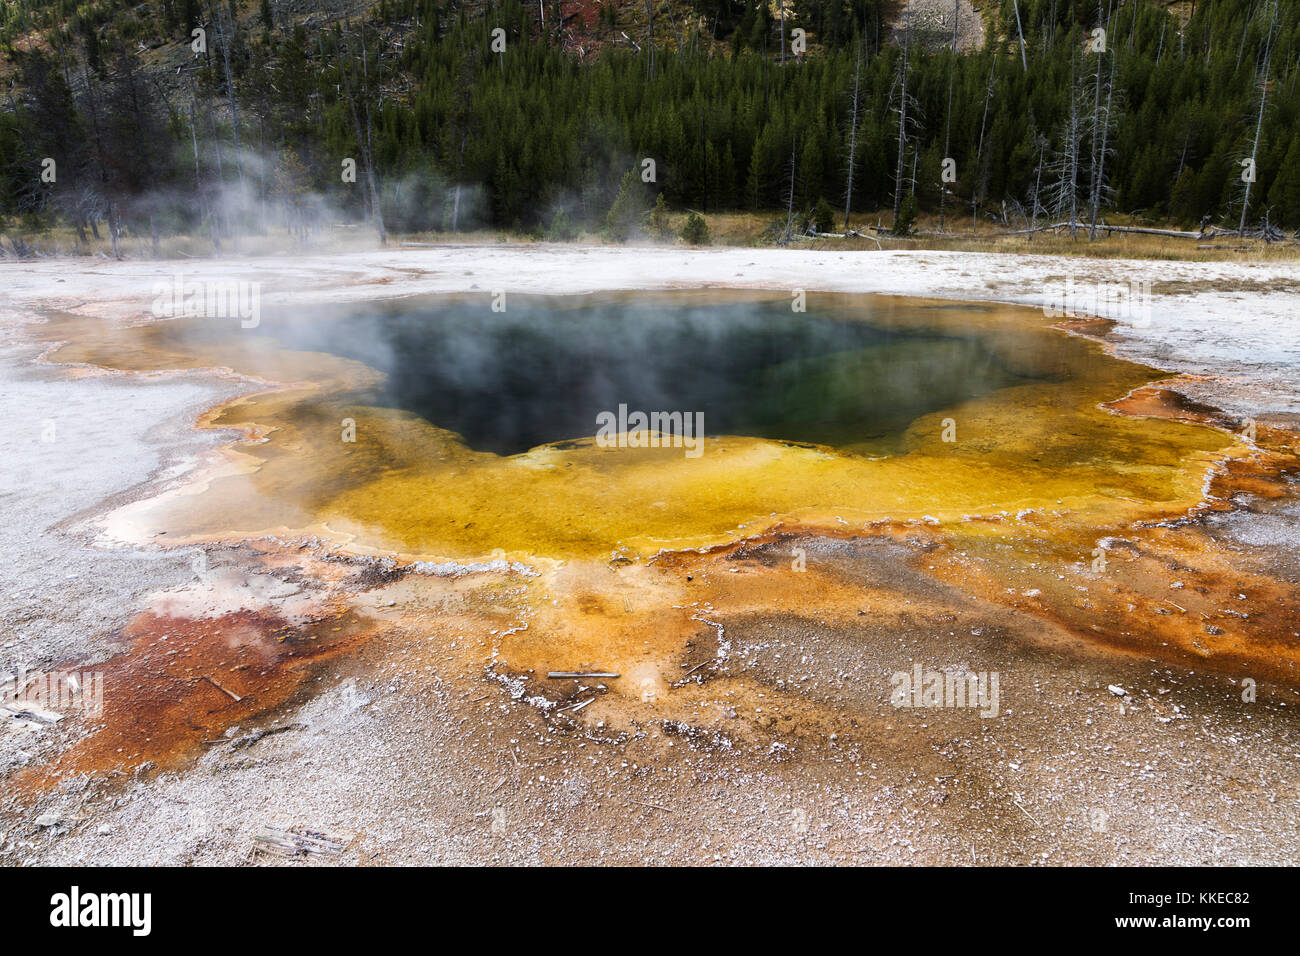 Emerald Pool Thermal Feature in Black Sand Geyser Basin, Yellowstone National Park Stock Photo